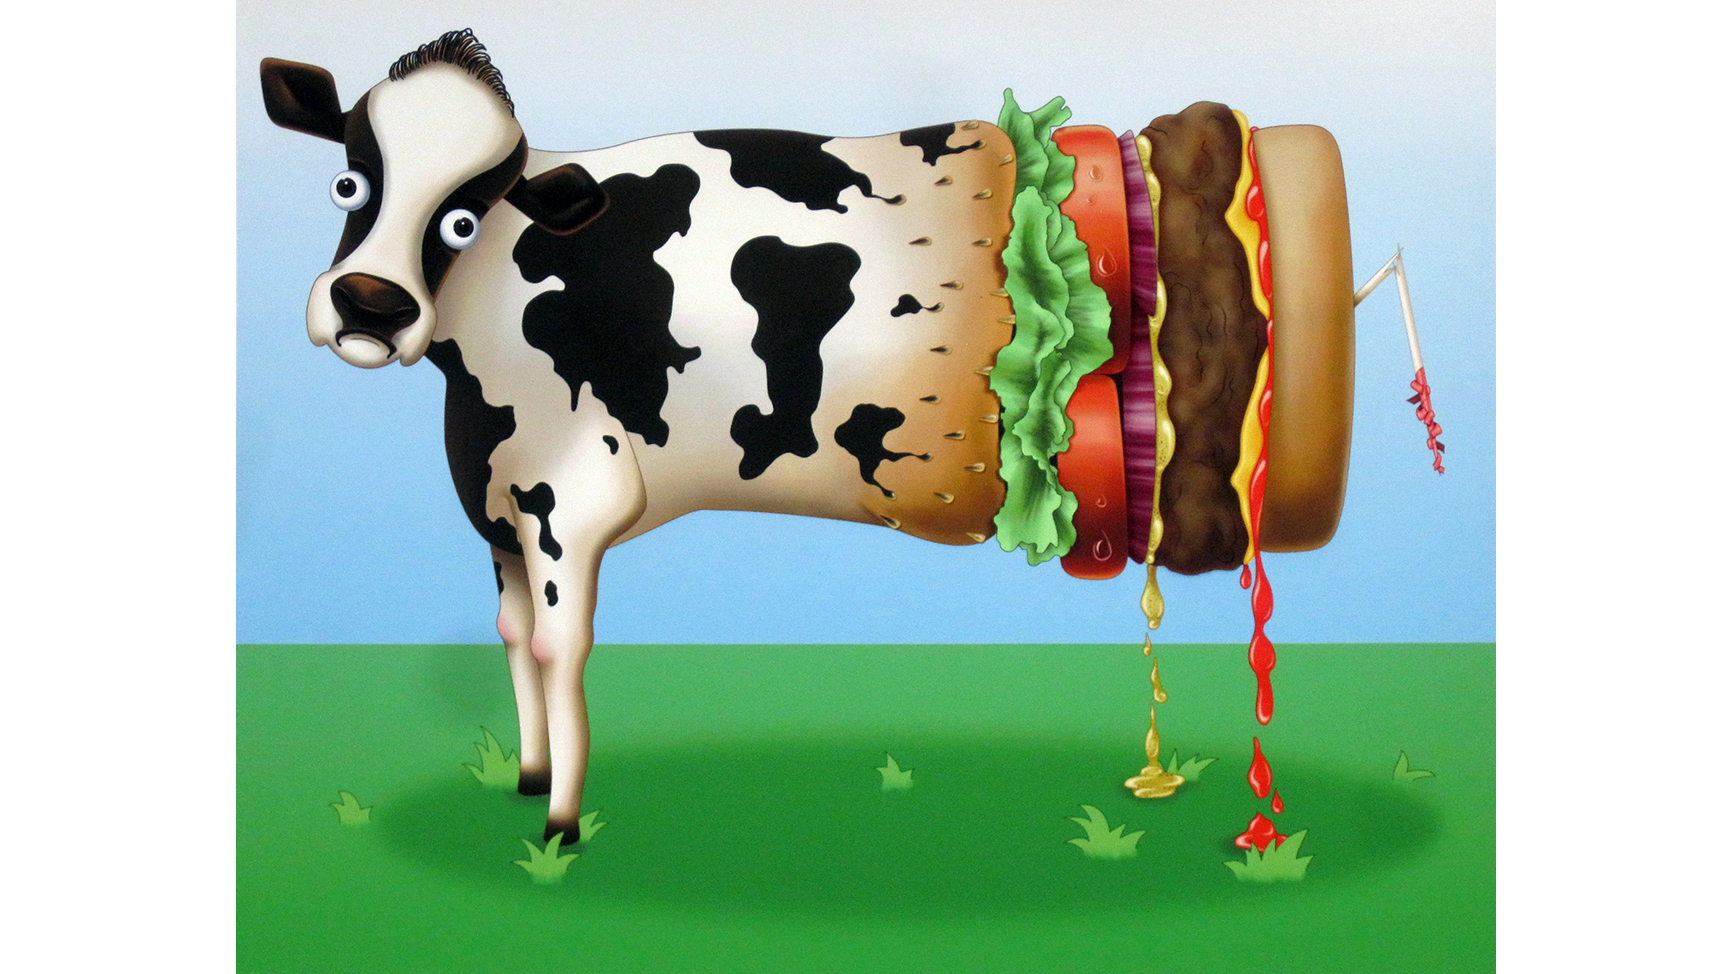 An illustration of a cow made half of hamburger ingredients